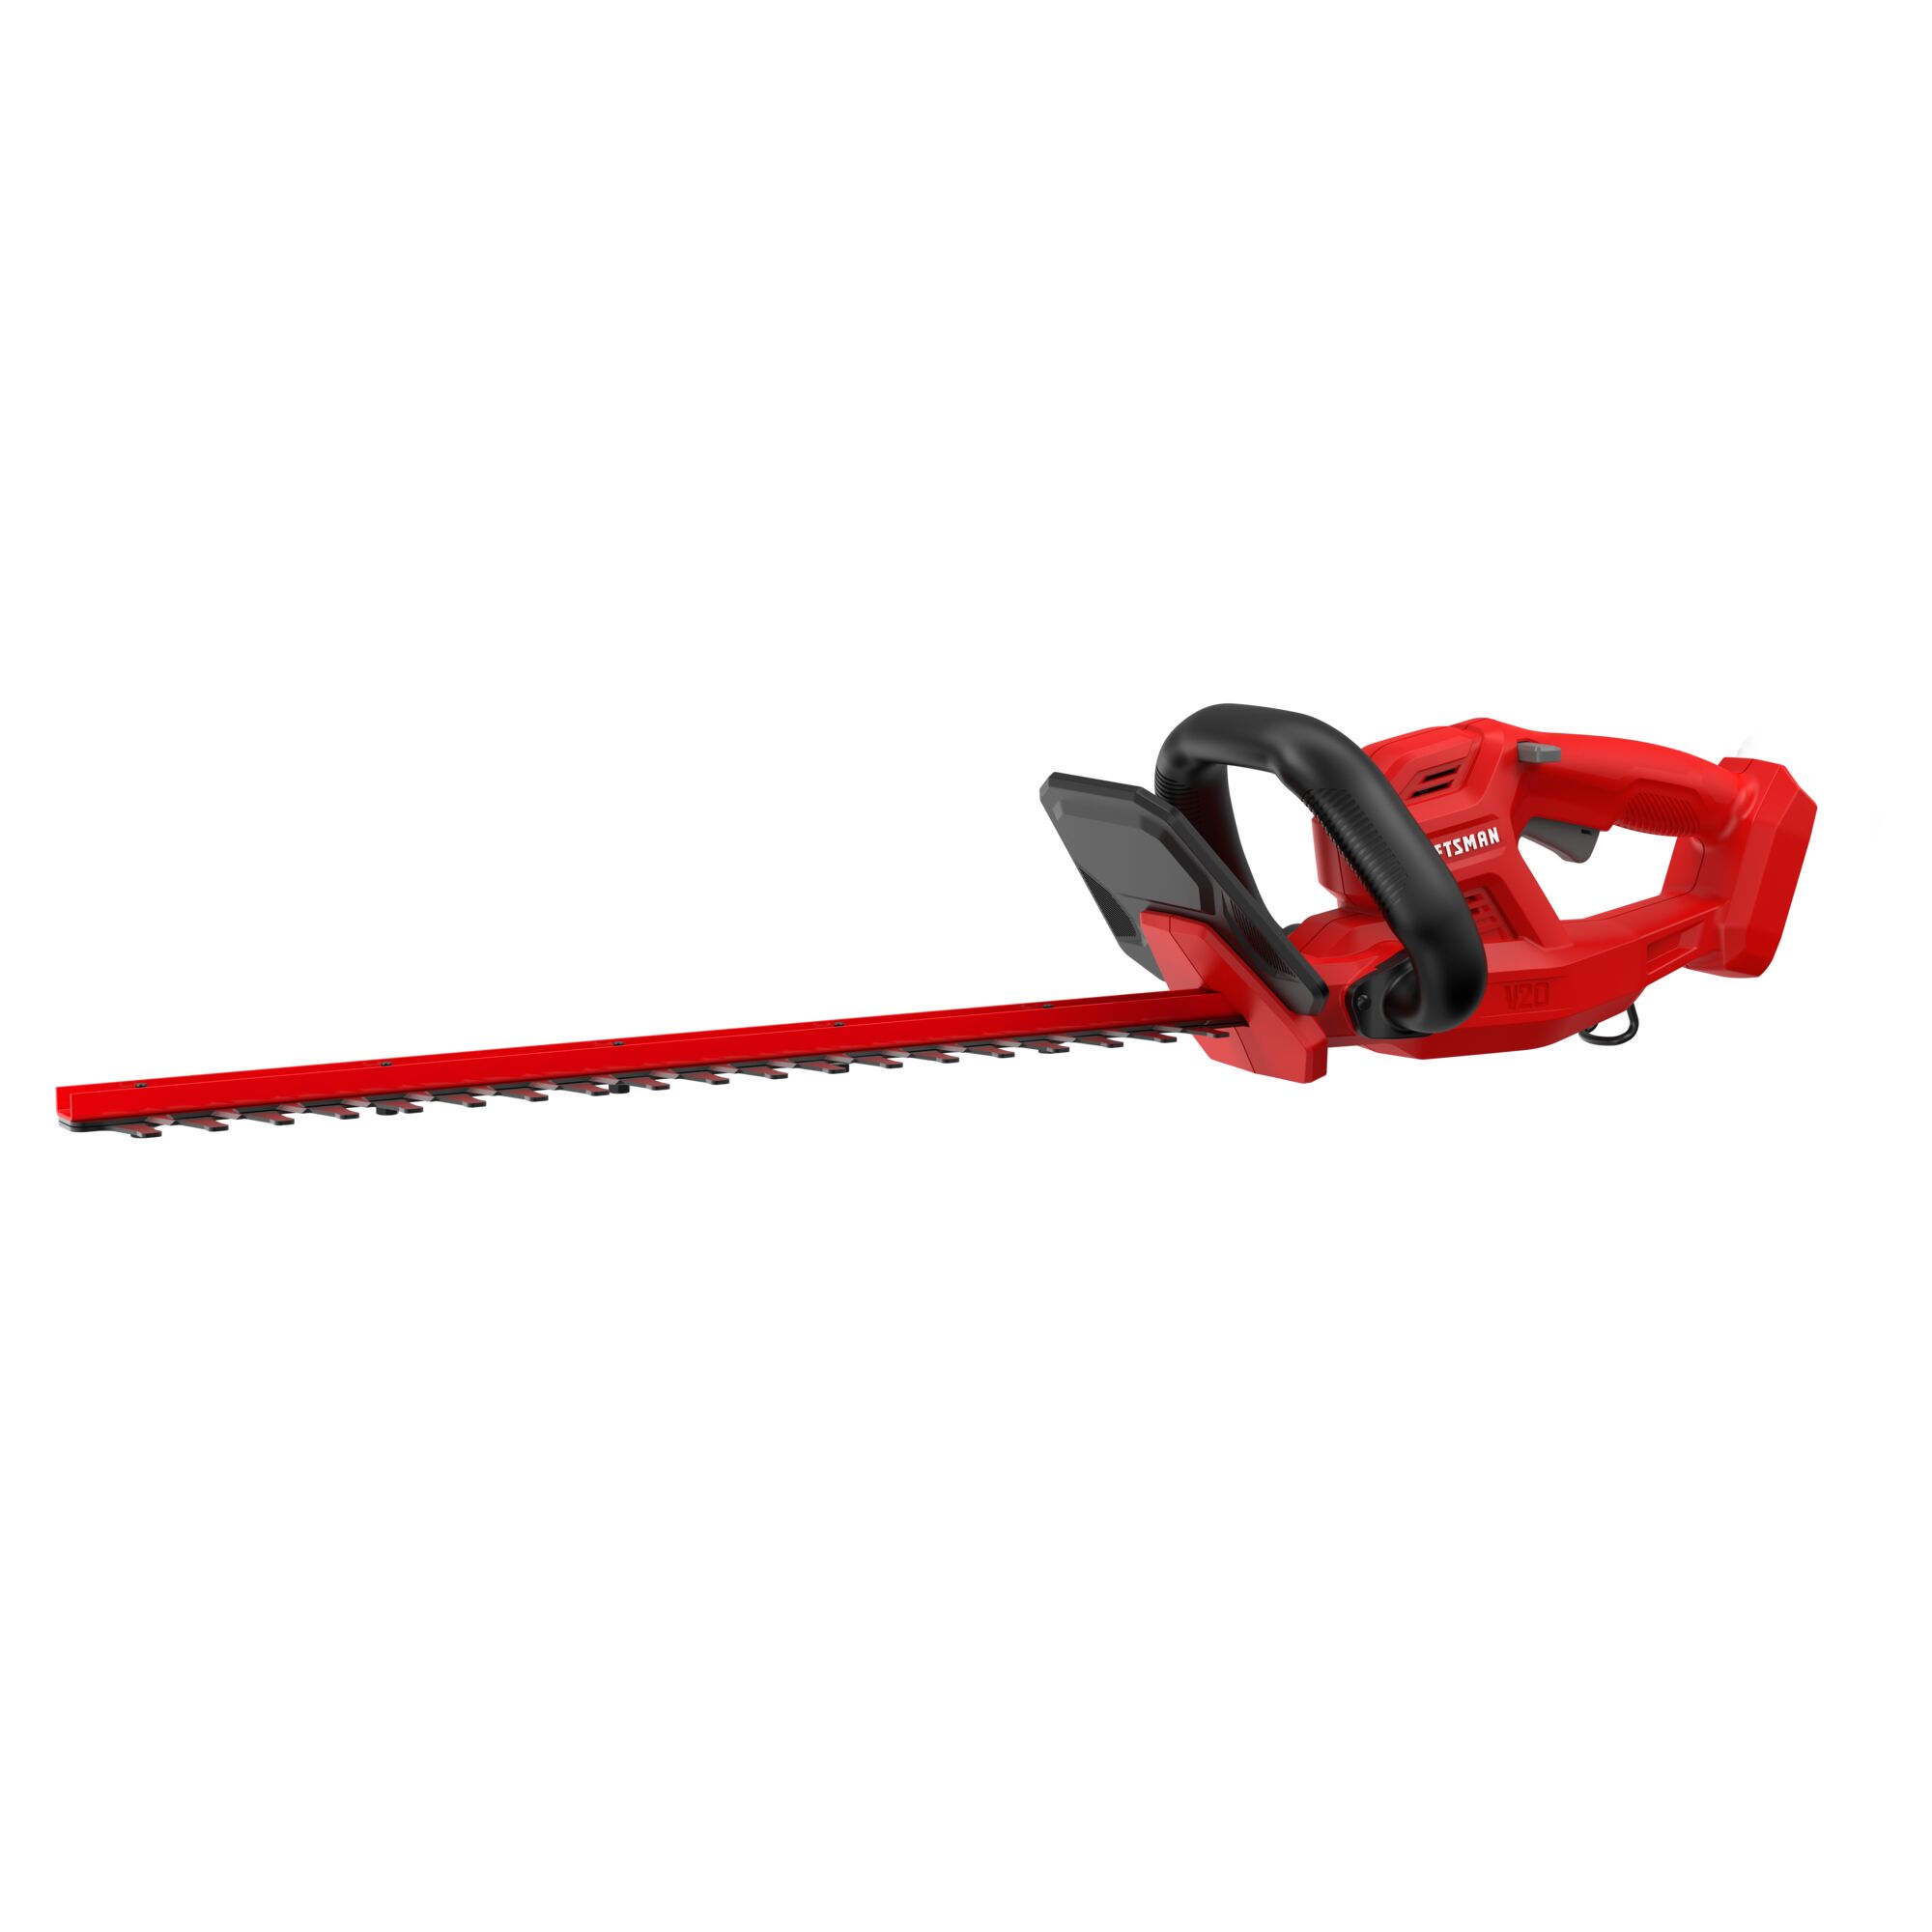 Cordless 20 inch hedge trimmer kit.